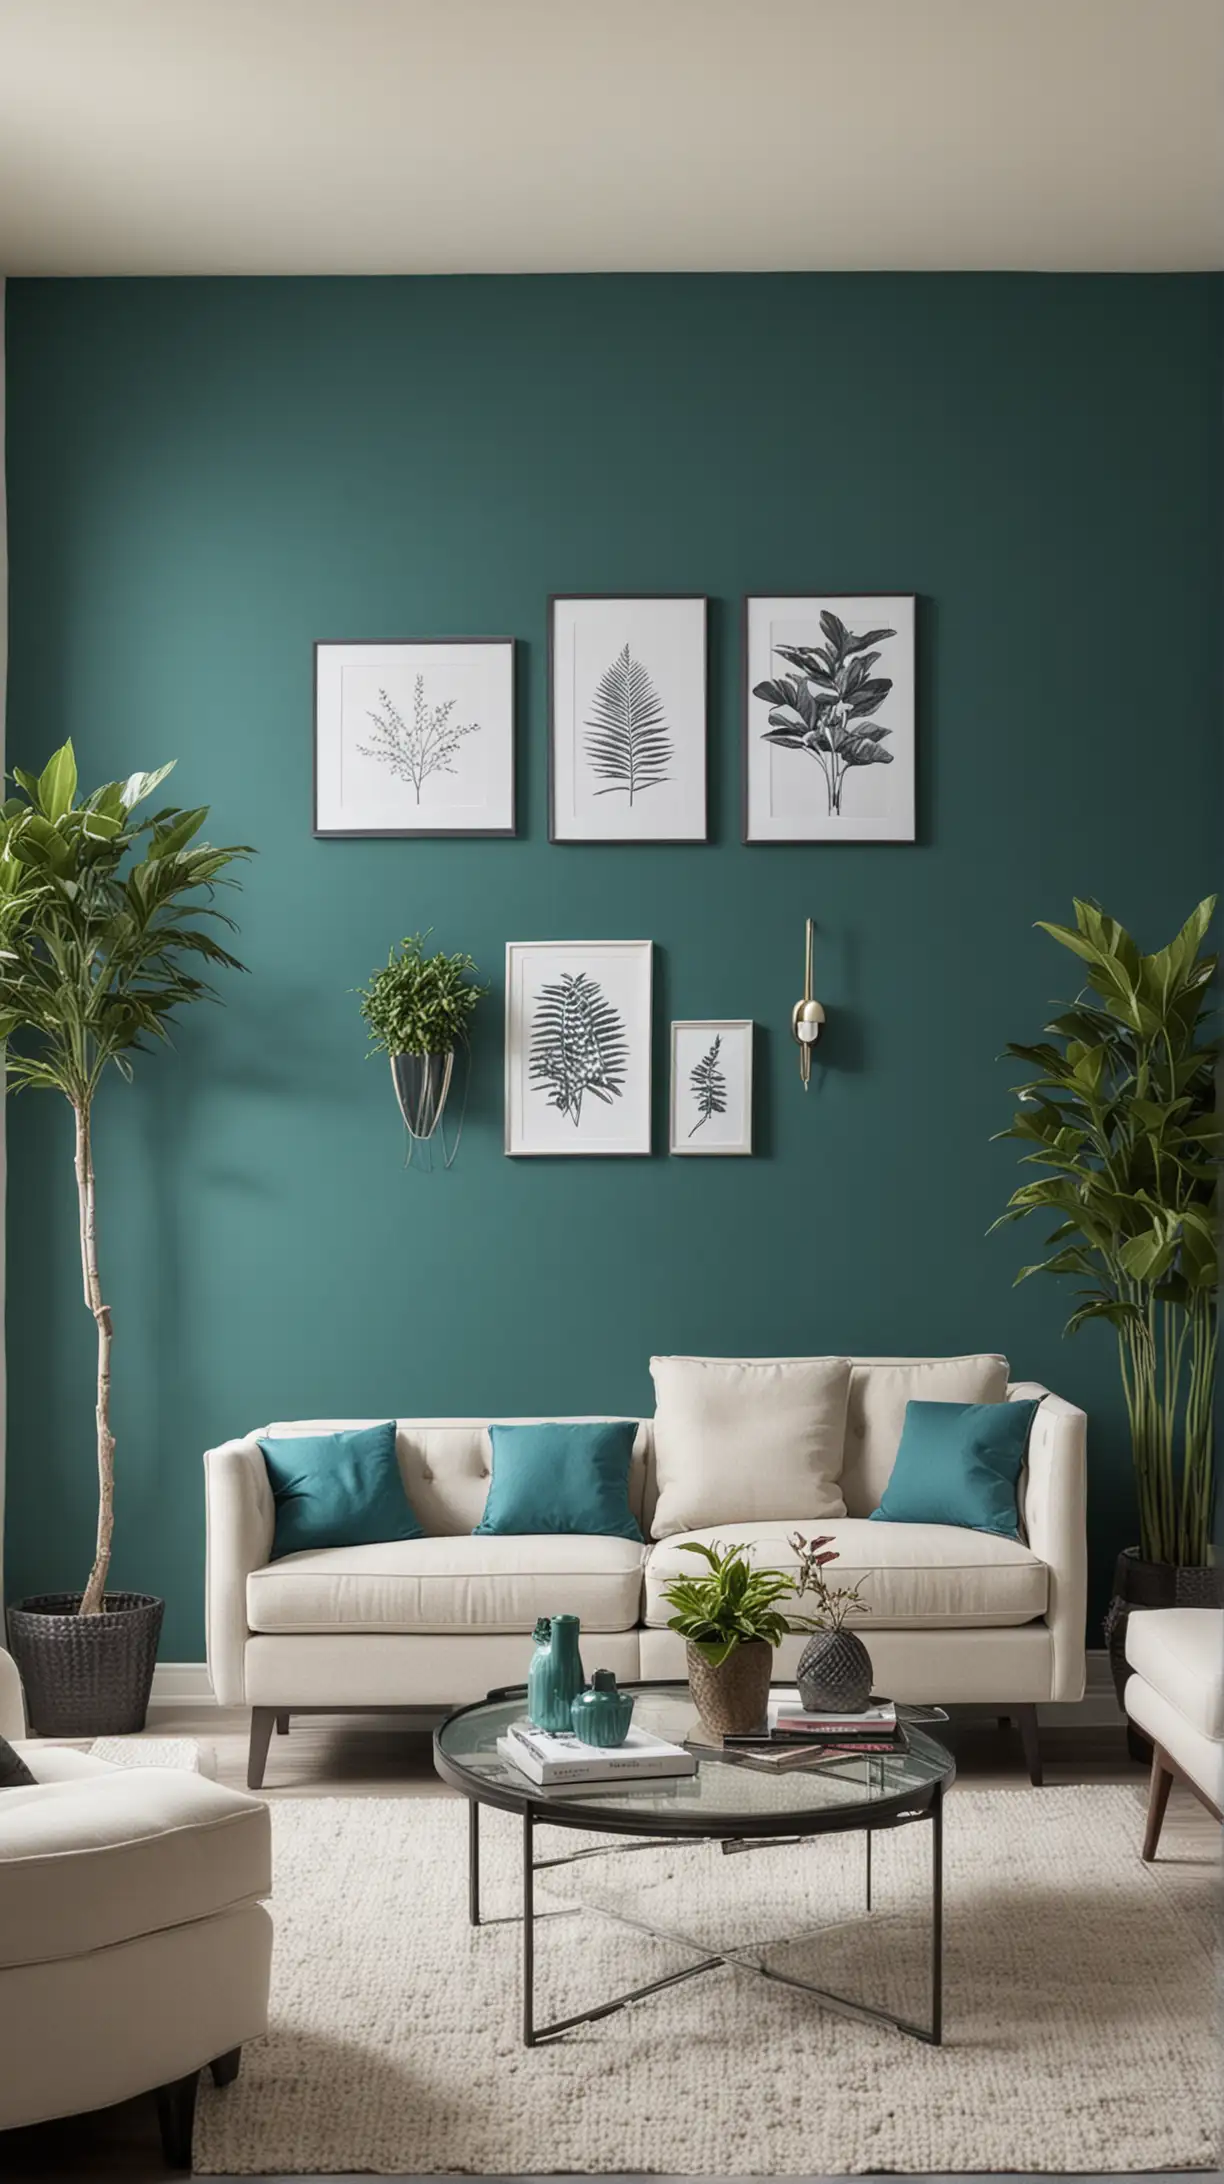 Create a modern living room with one bold teal accent wall, featuring neutral-colored, contemporary furniture in front of it. Add some decorative plants and minimalist artwork to enhance the aesthetic. Focus on clean lines and a spacious feel.